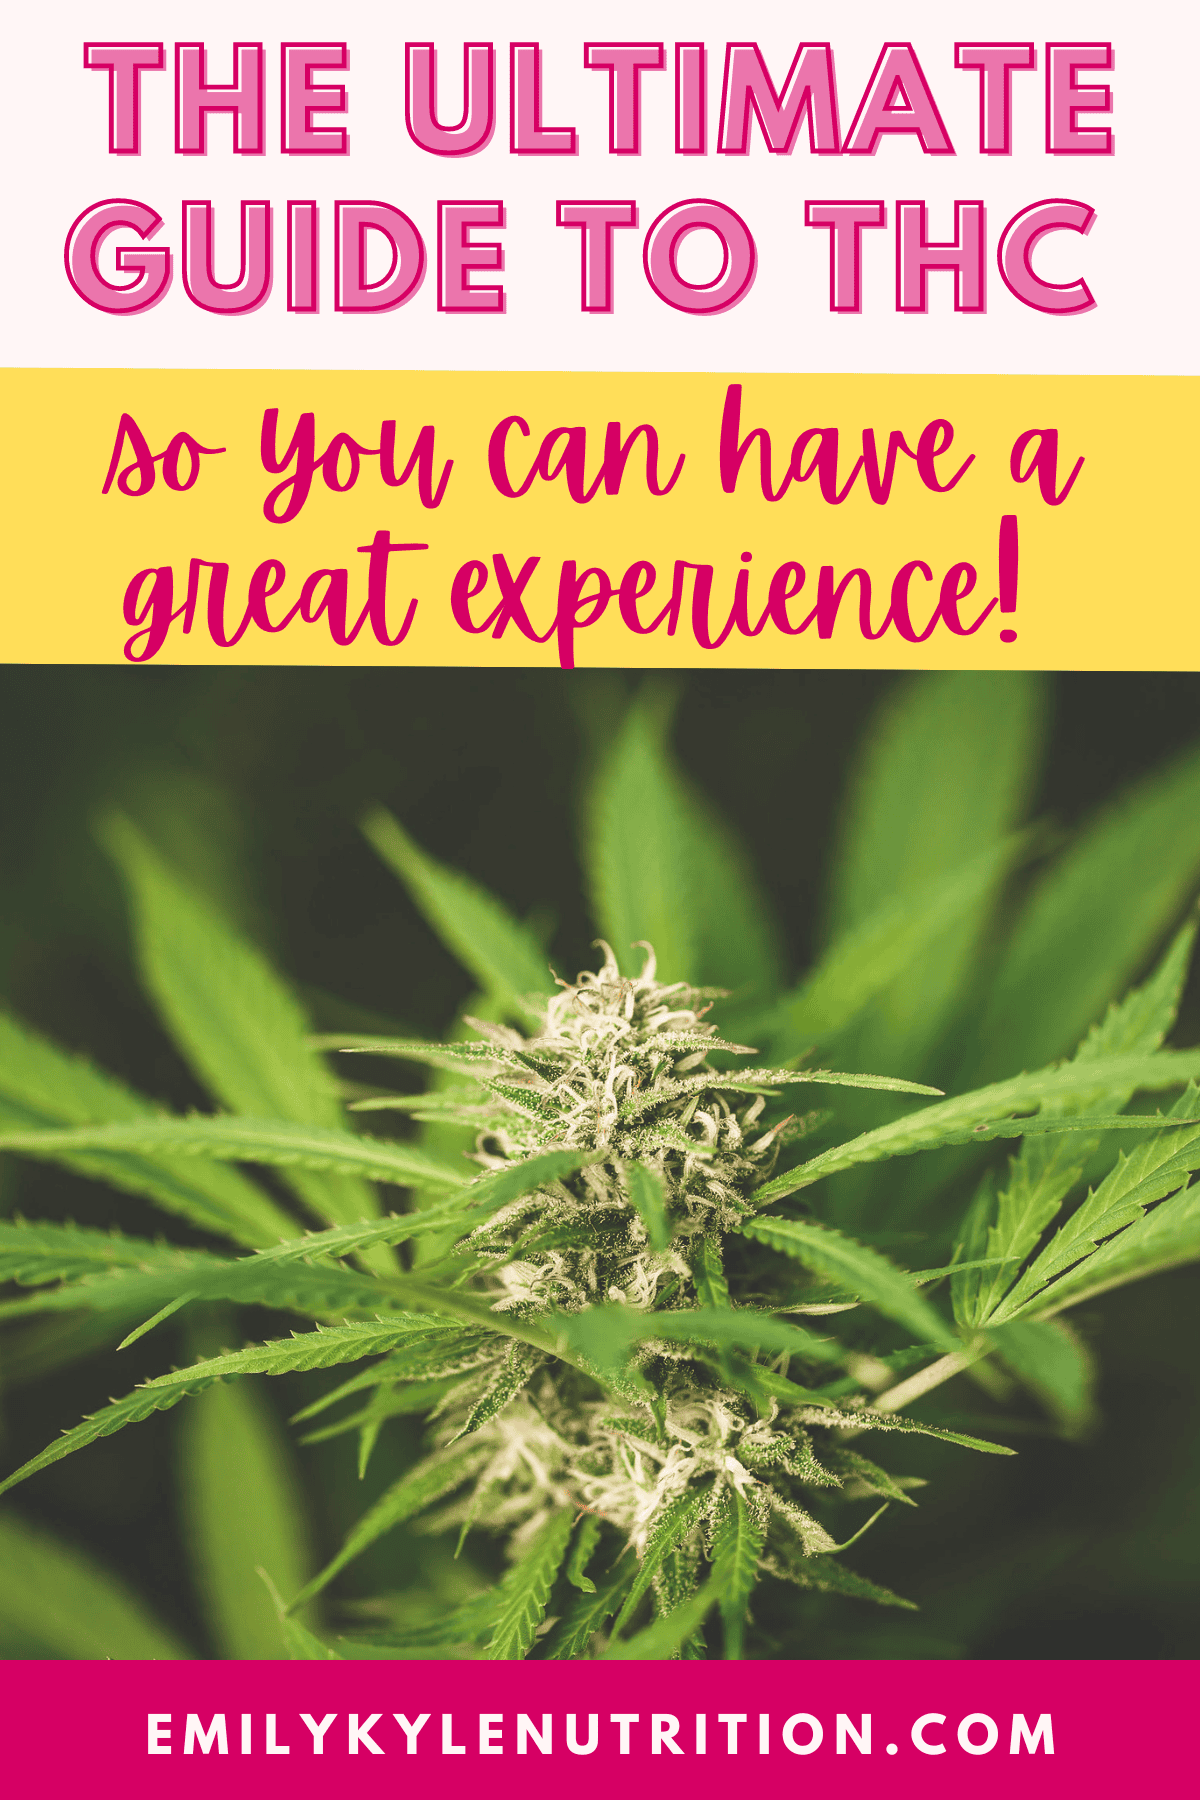 A picture of Emily Kyles Cannabis Plant with text that says the ultimate guide to THC so you can have a great experience. 